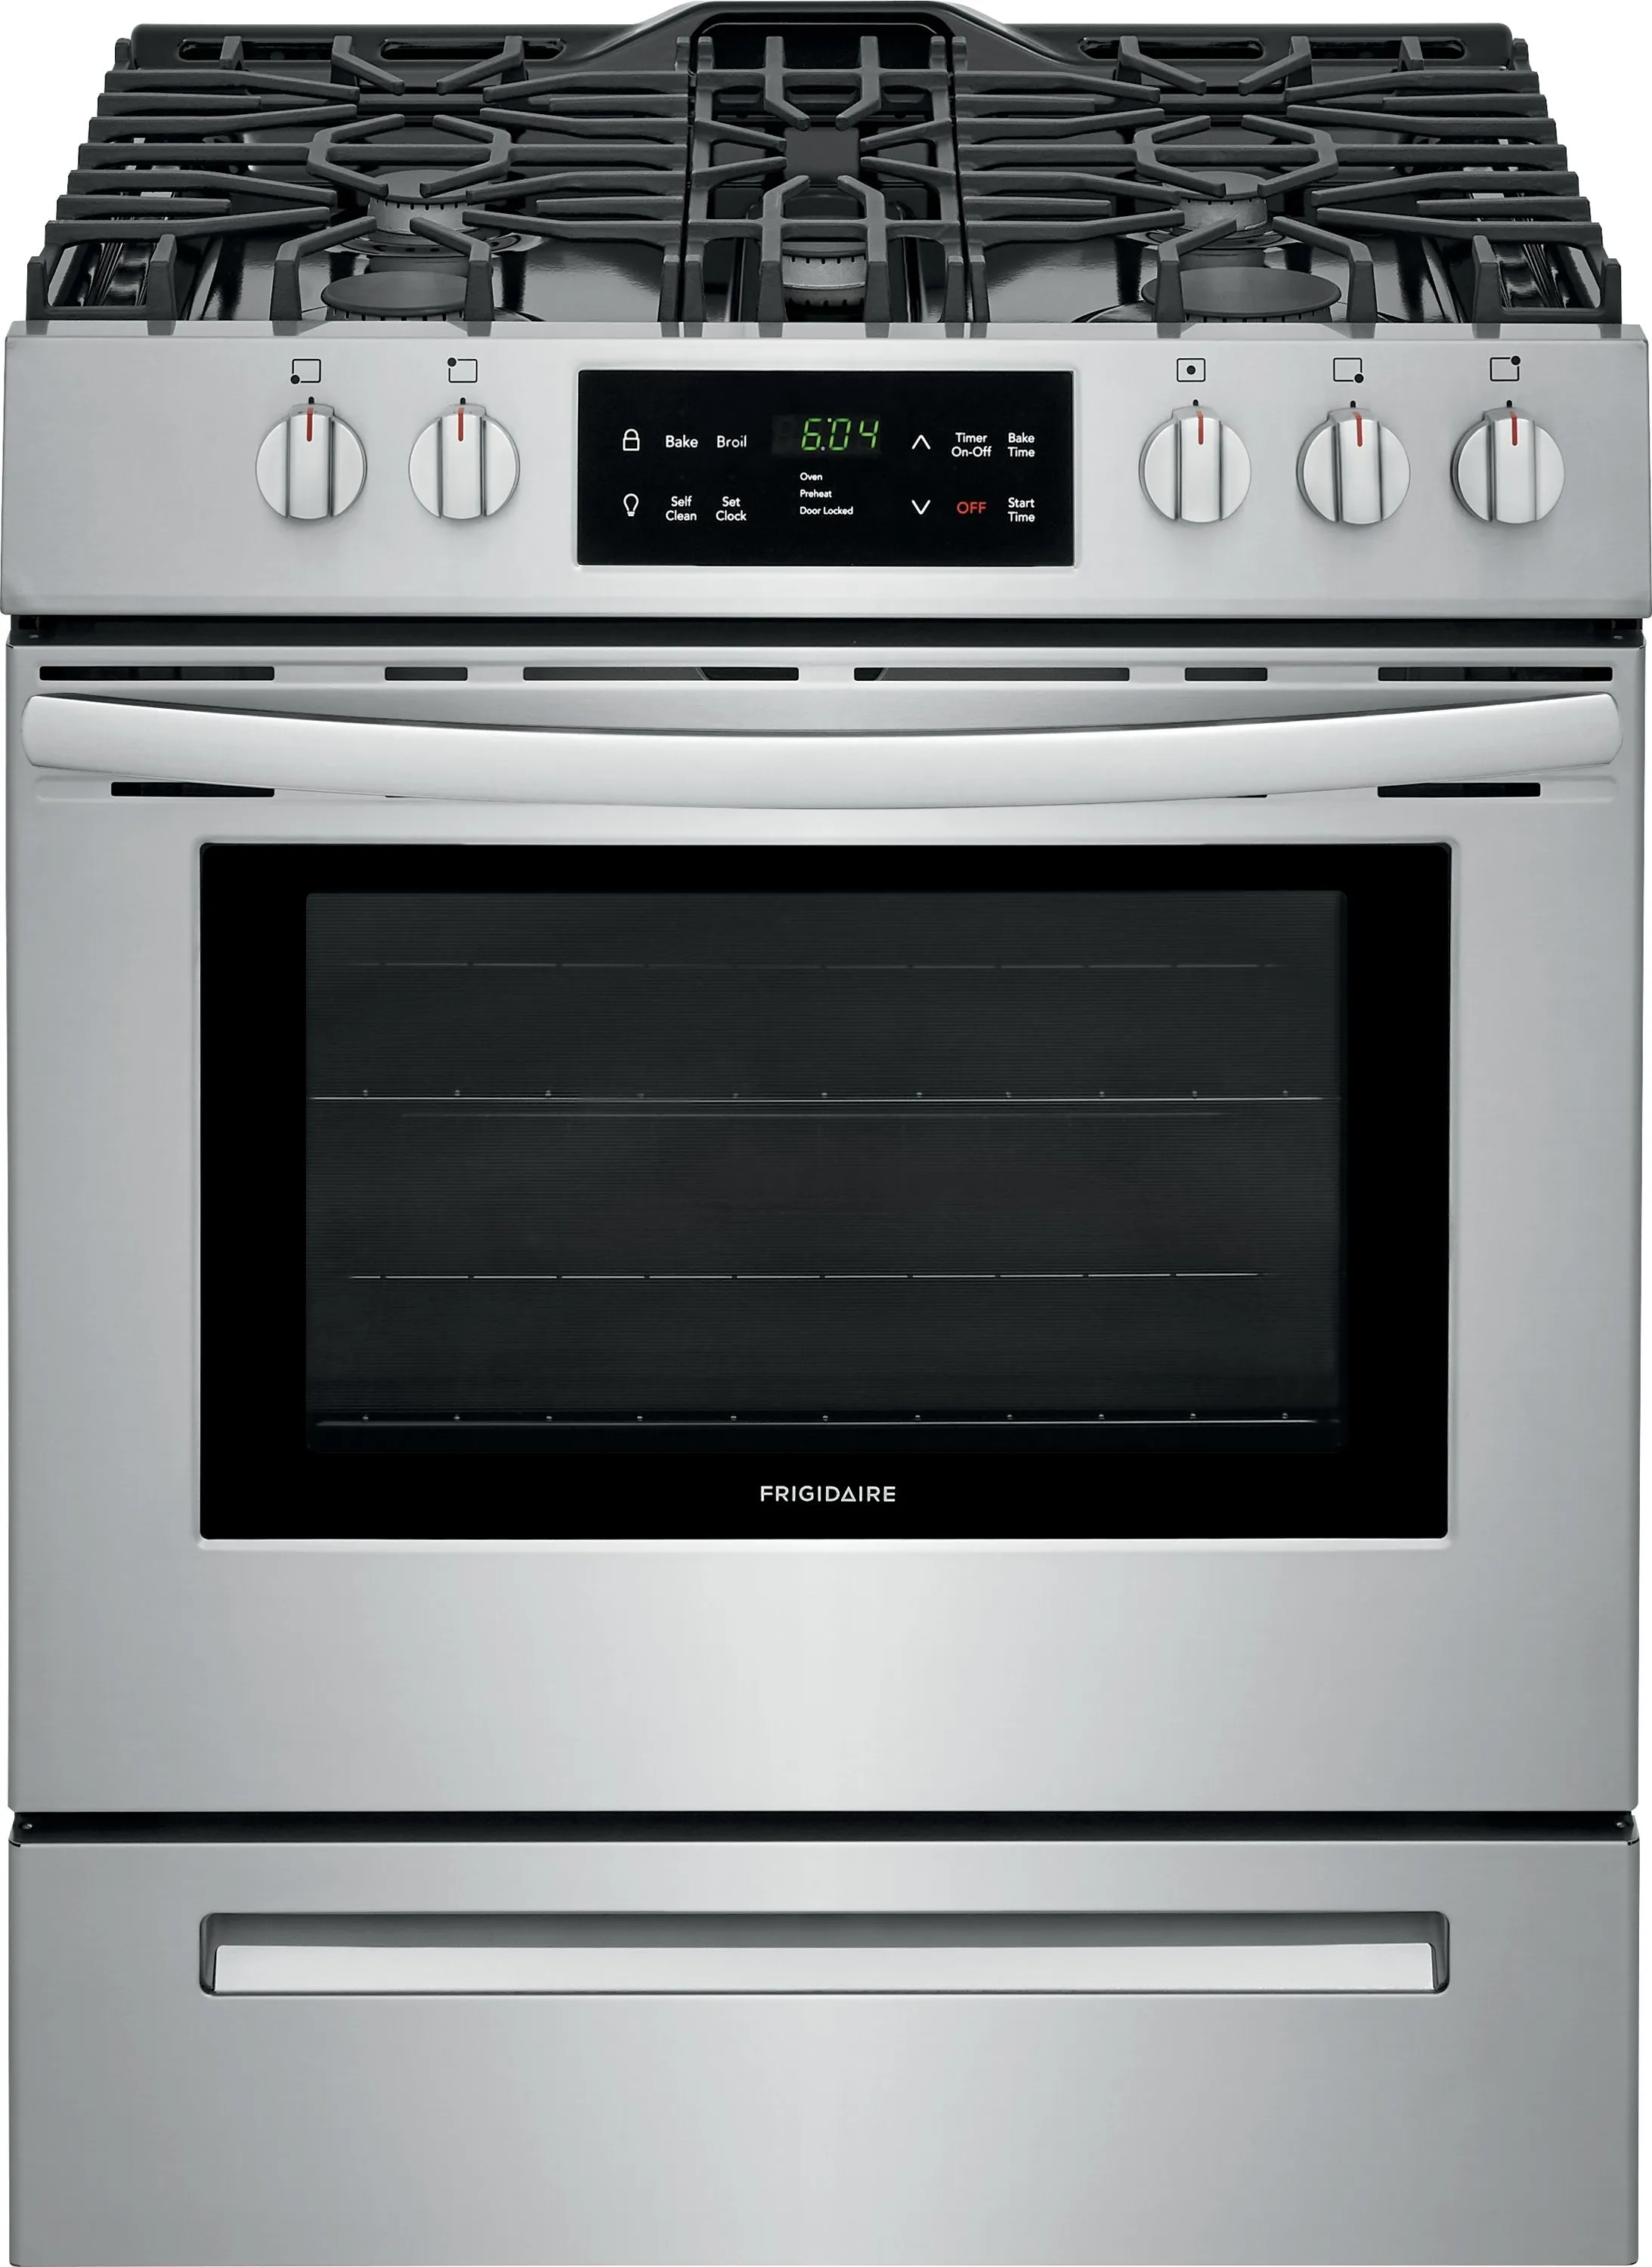 Front view of Frigidaire FFGH3054US 30” gas range 